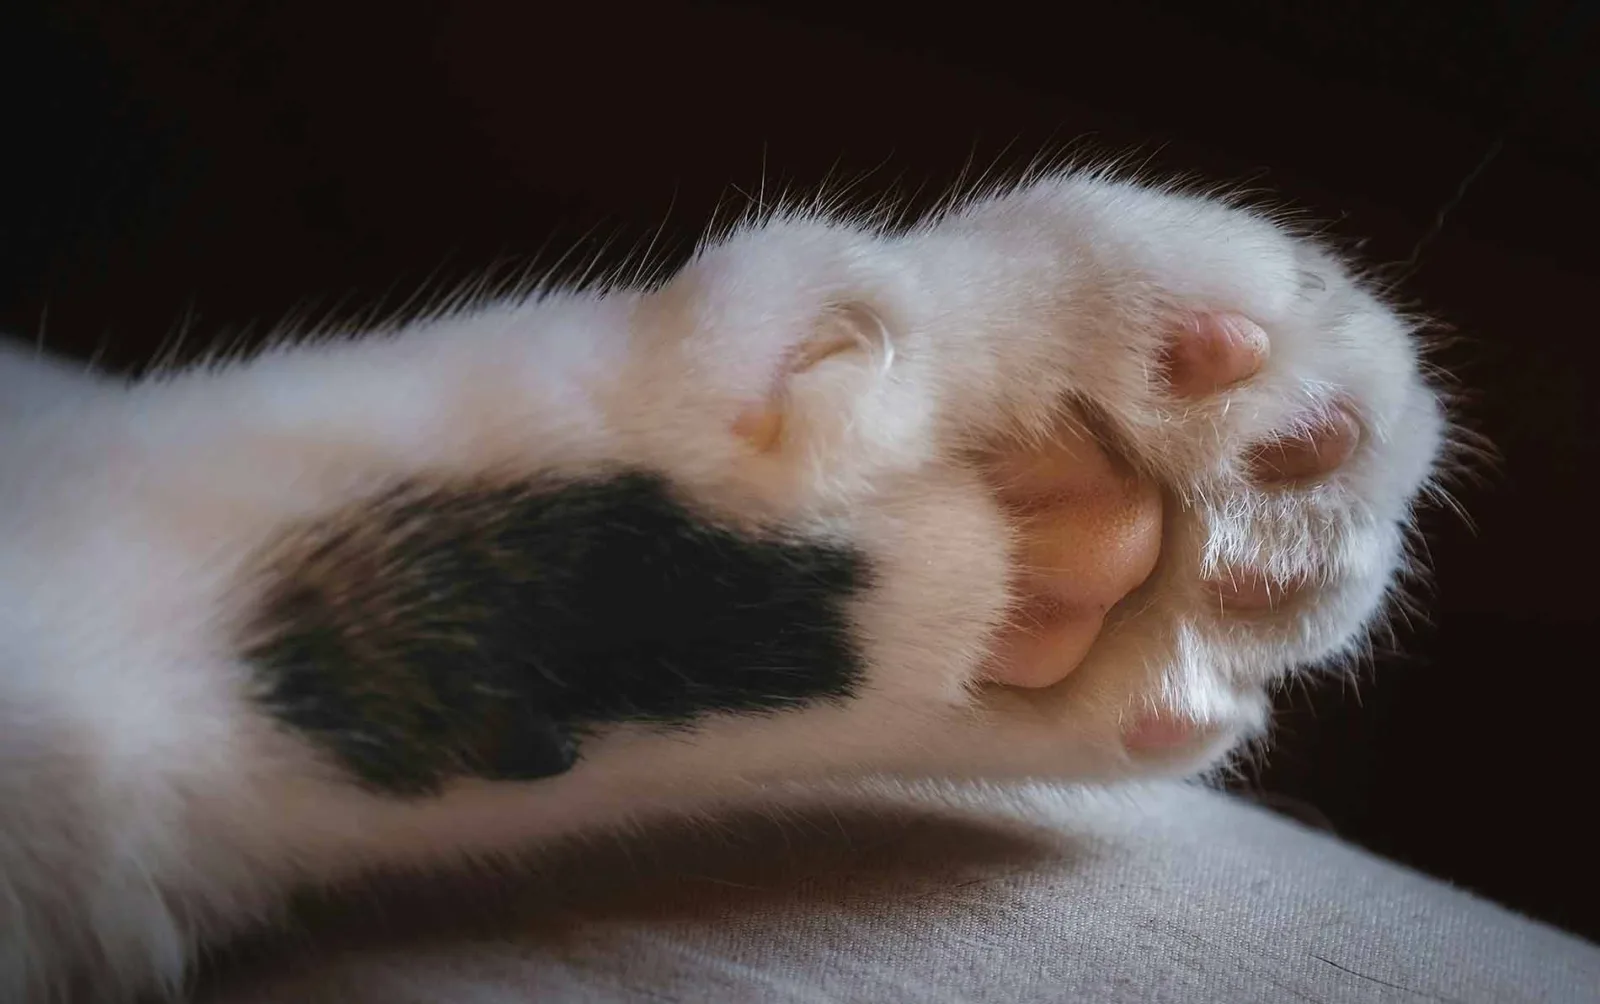 A close-up of a cat's front paw shows a white base, a distinctive black spot below her pads, and soft pink pads surrounded by fluffy white fur.